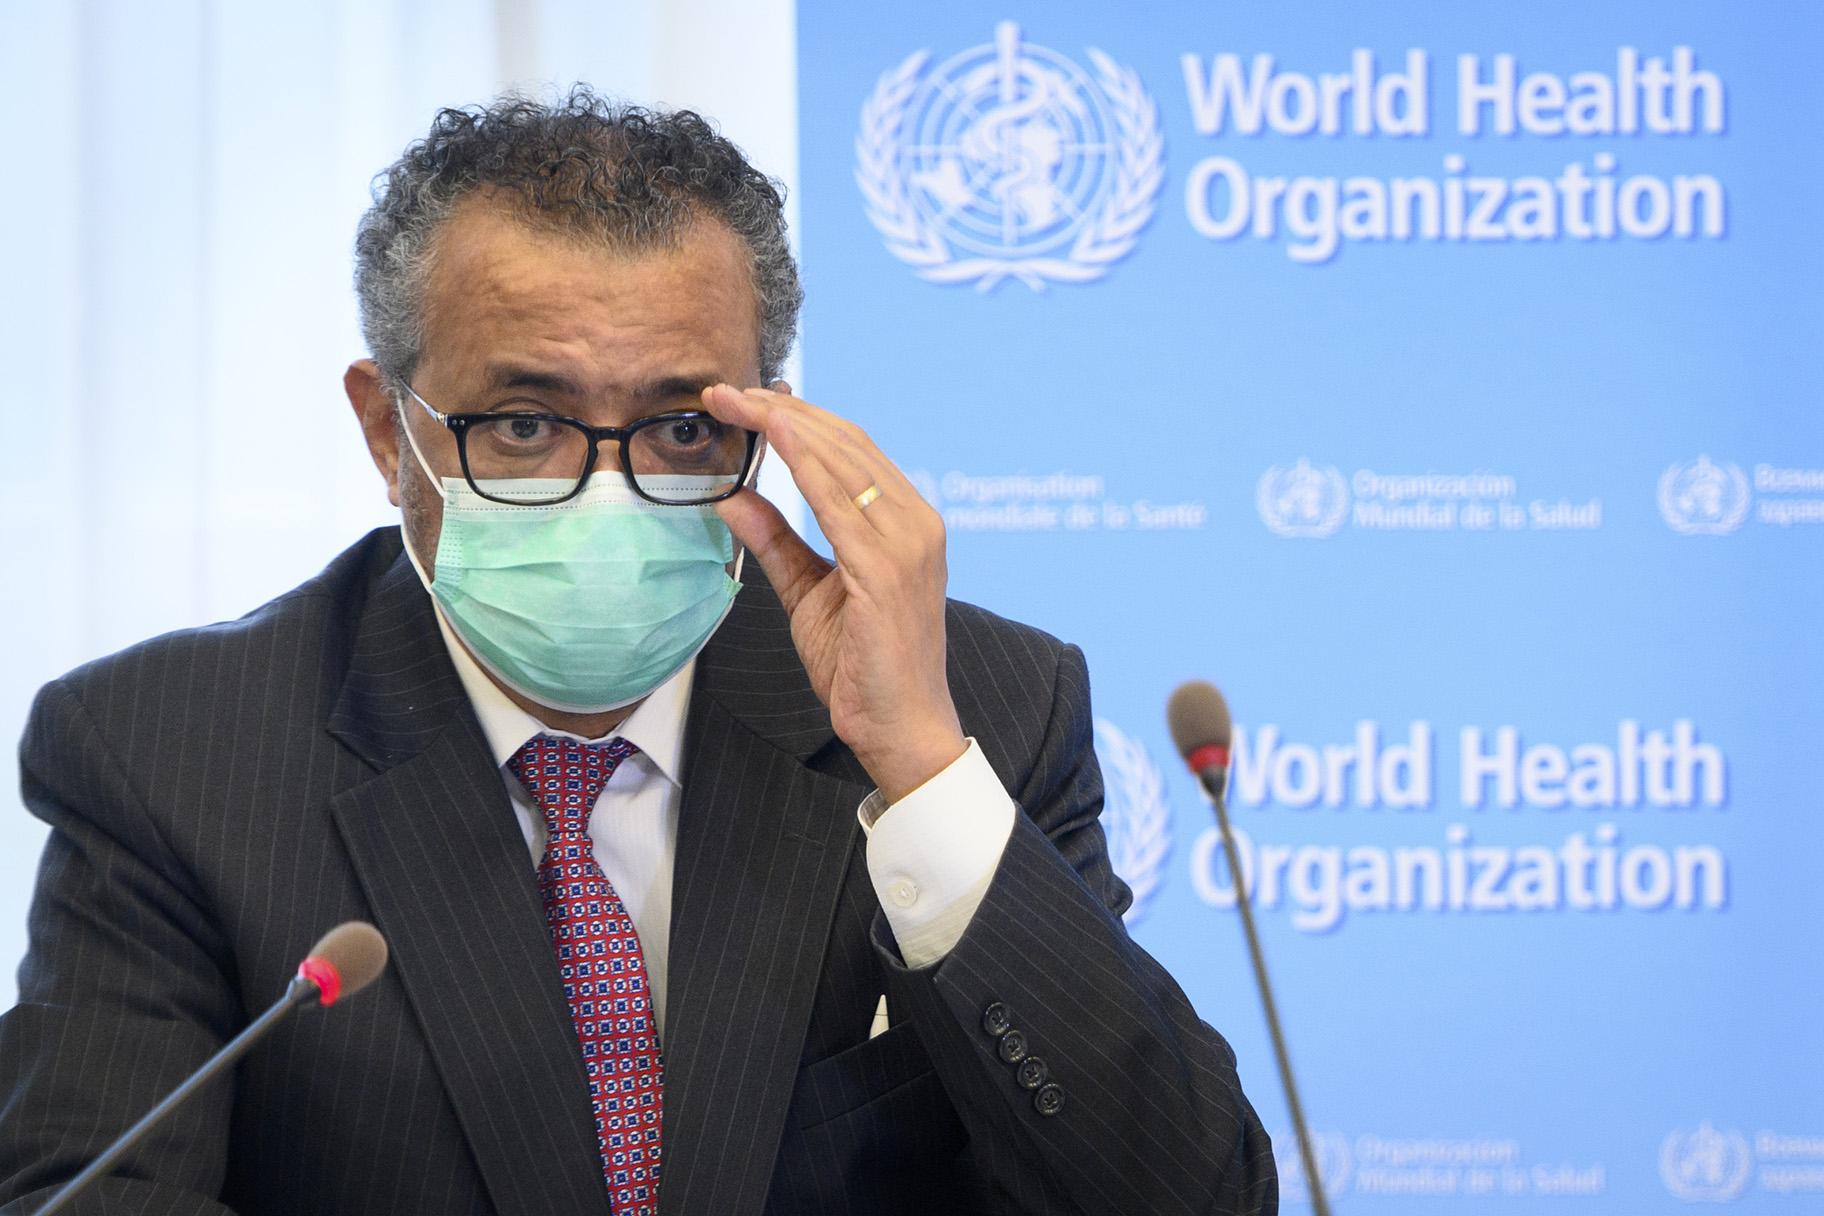 In this Monday, May 24, 2021 file photo, Tedros Adhanom Ghebreyesus, director general of the World Health Organization (WHO), speaks during a bilateral meeting with Swiss Interior and Health Minister Alain Berset at the WHO headquarters, in Geneva, Switzerland. (Laurent Gillieron / Keystone via AP, File)